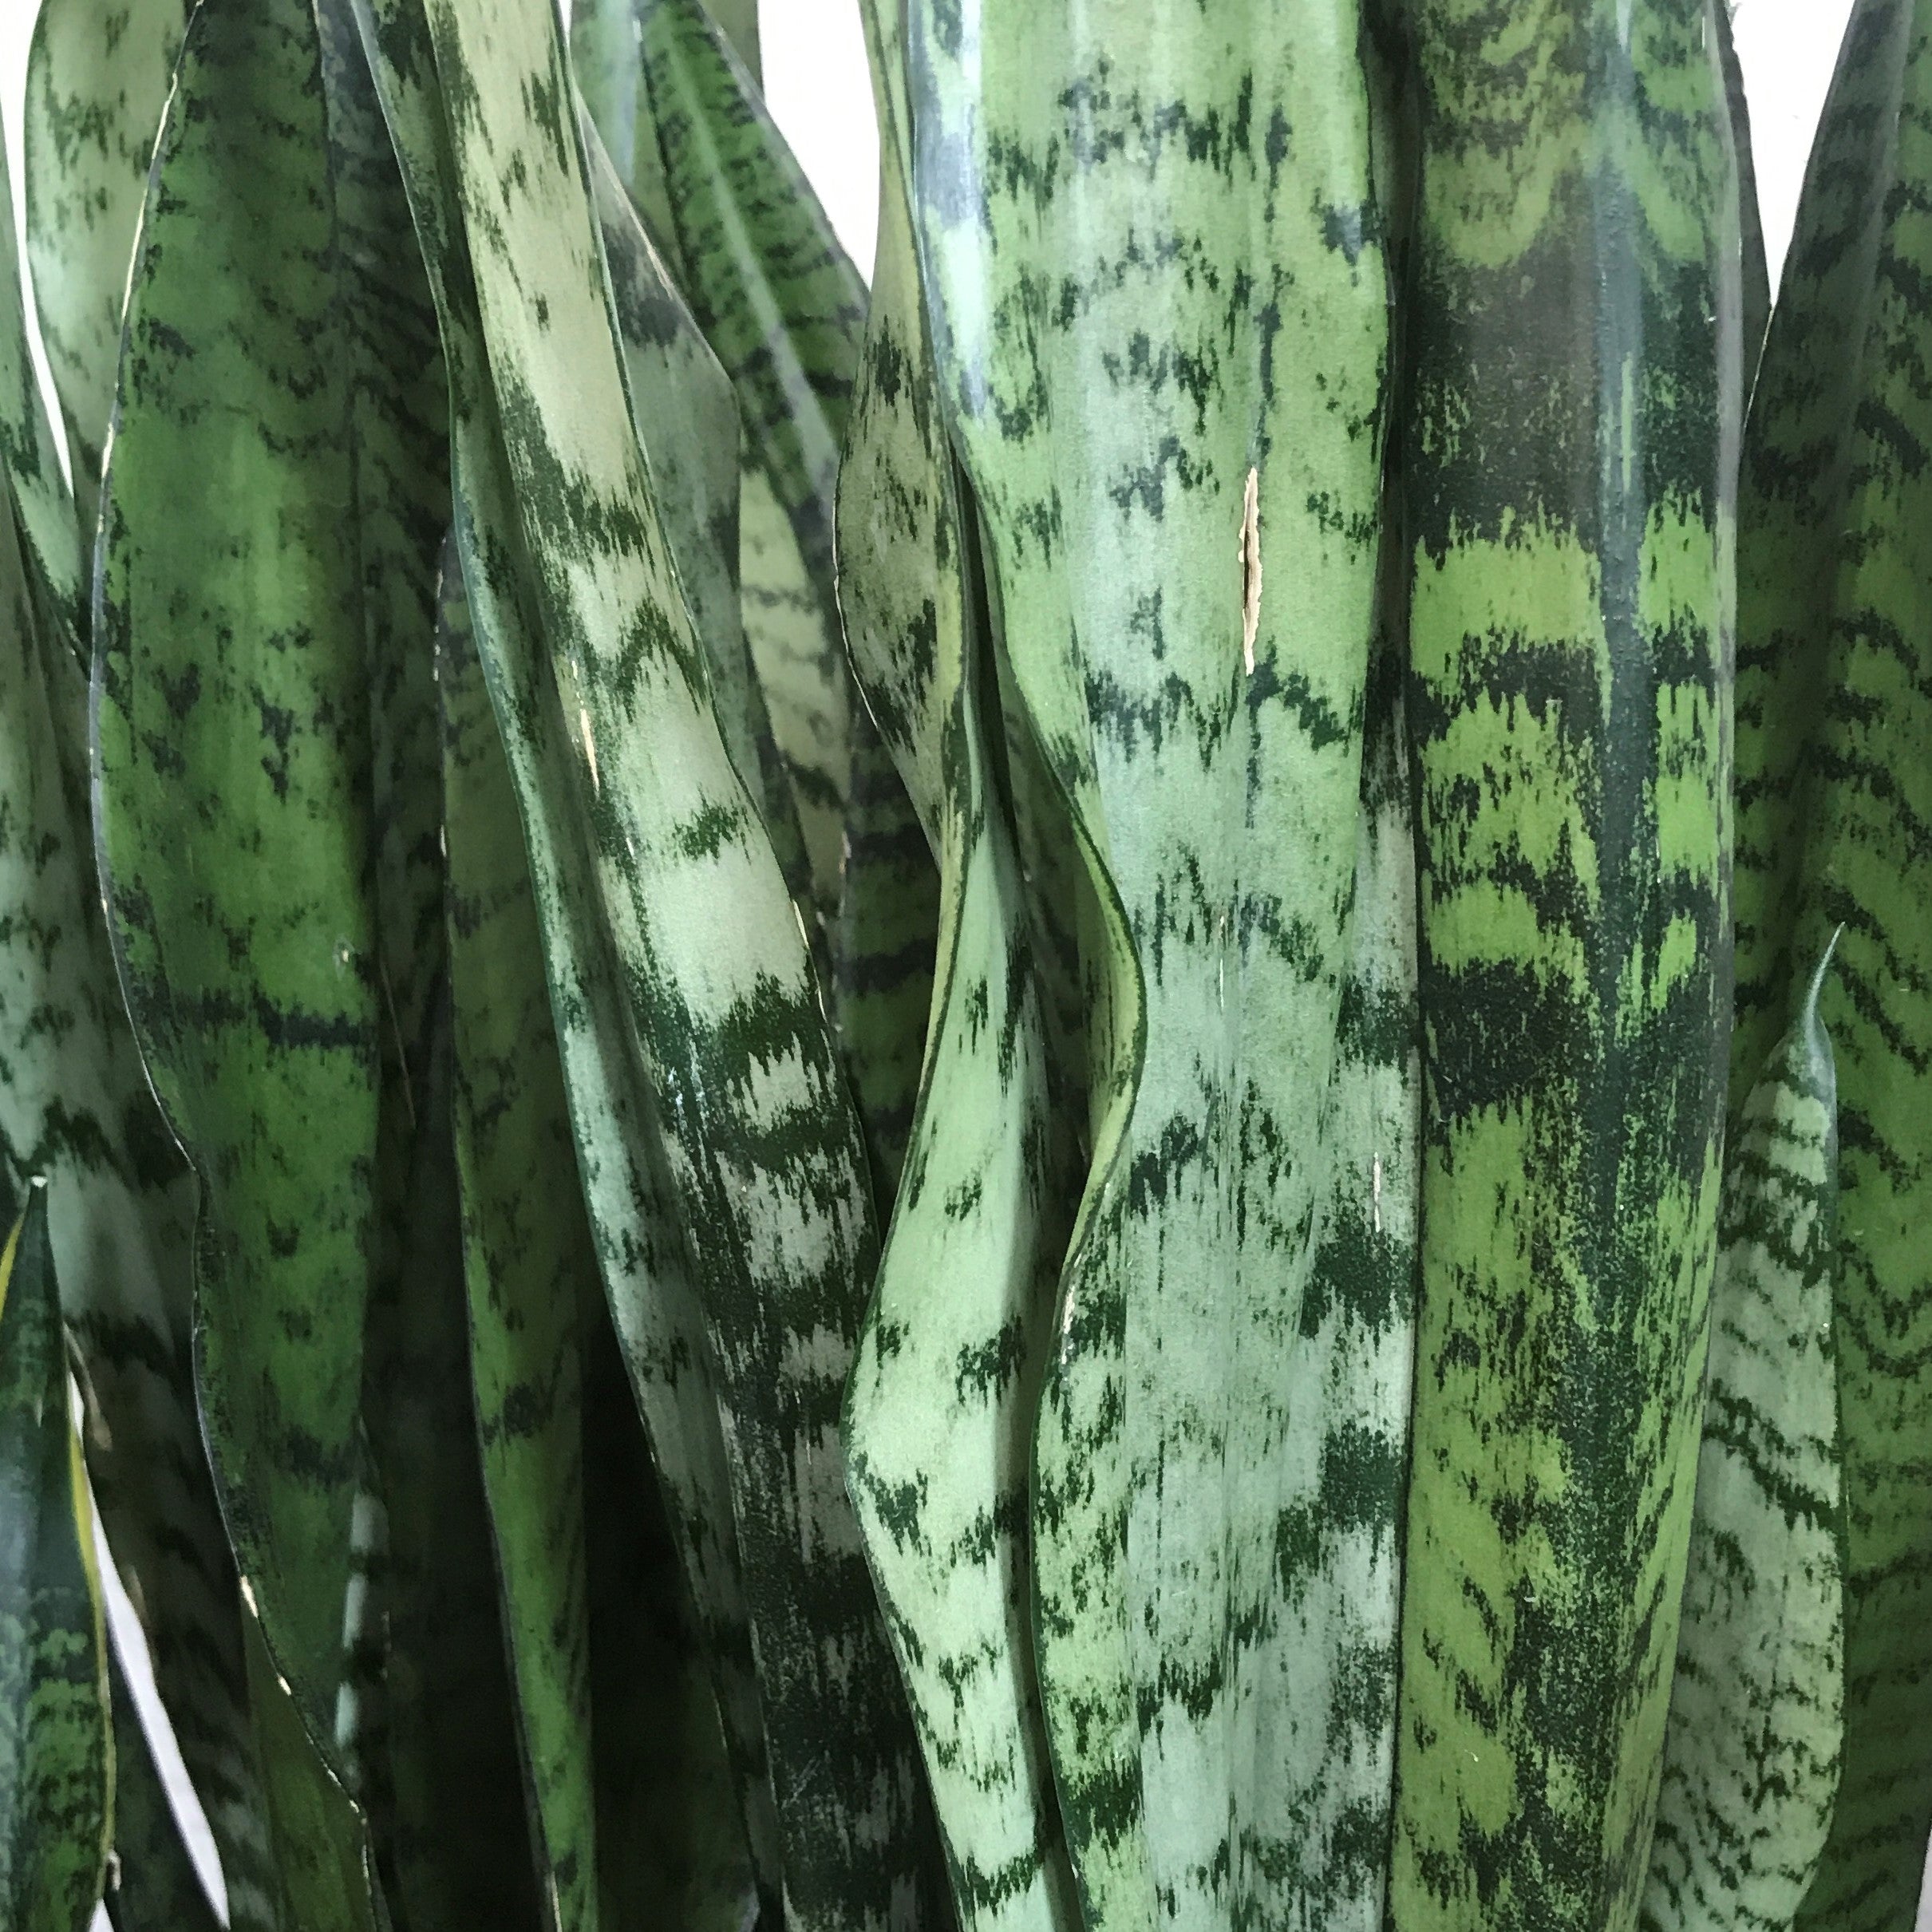 Sansevieria trifasciata - Snake Plant, Mother-in-Law's Tongue